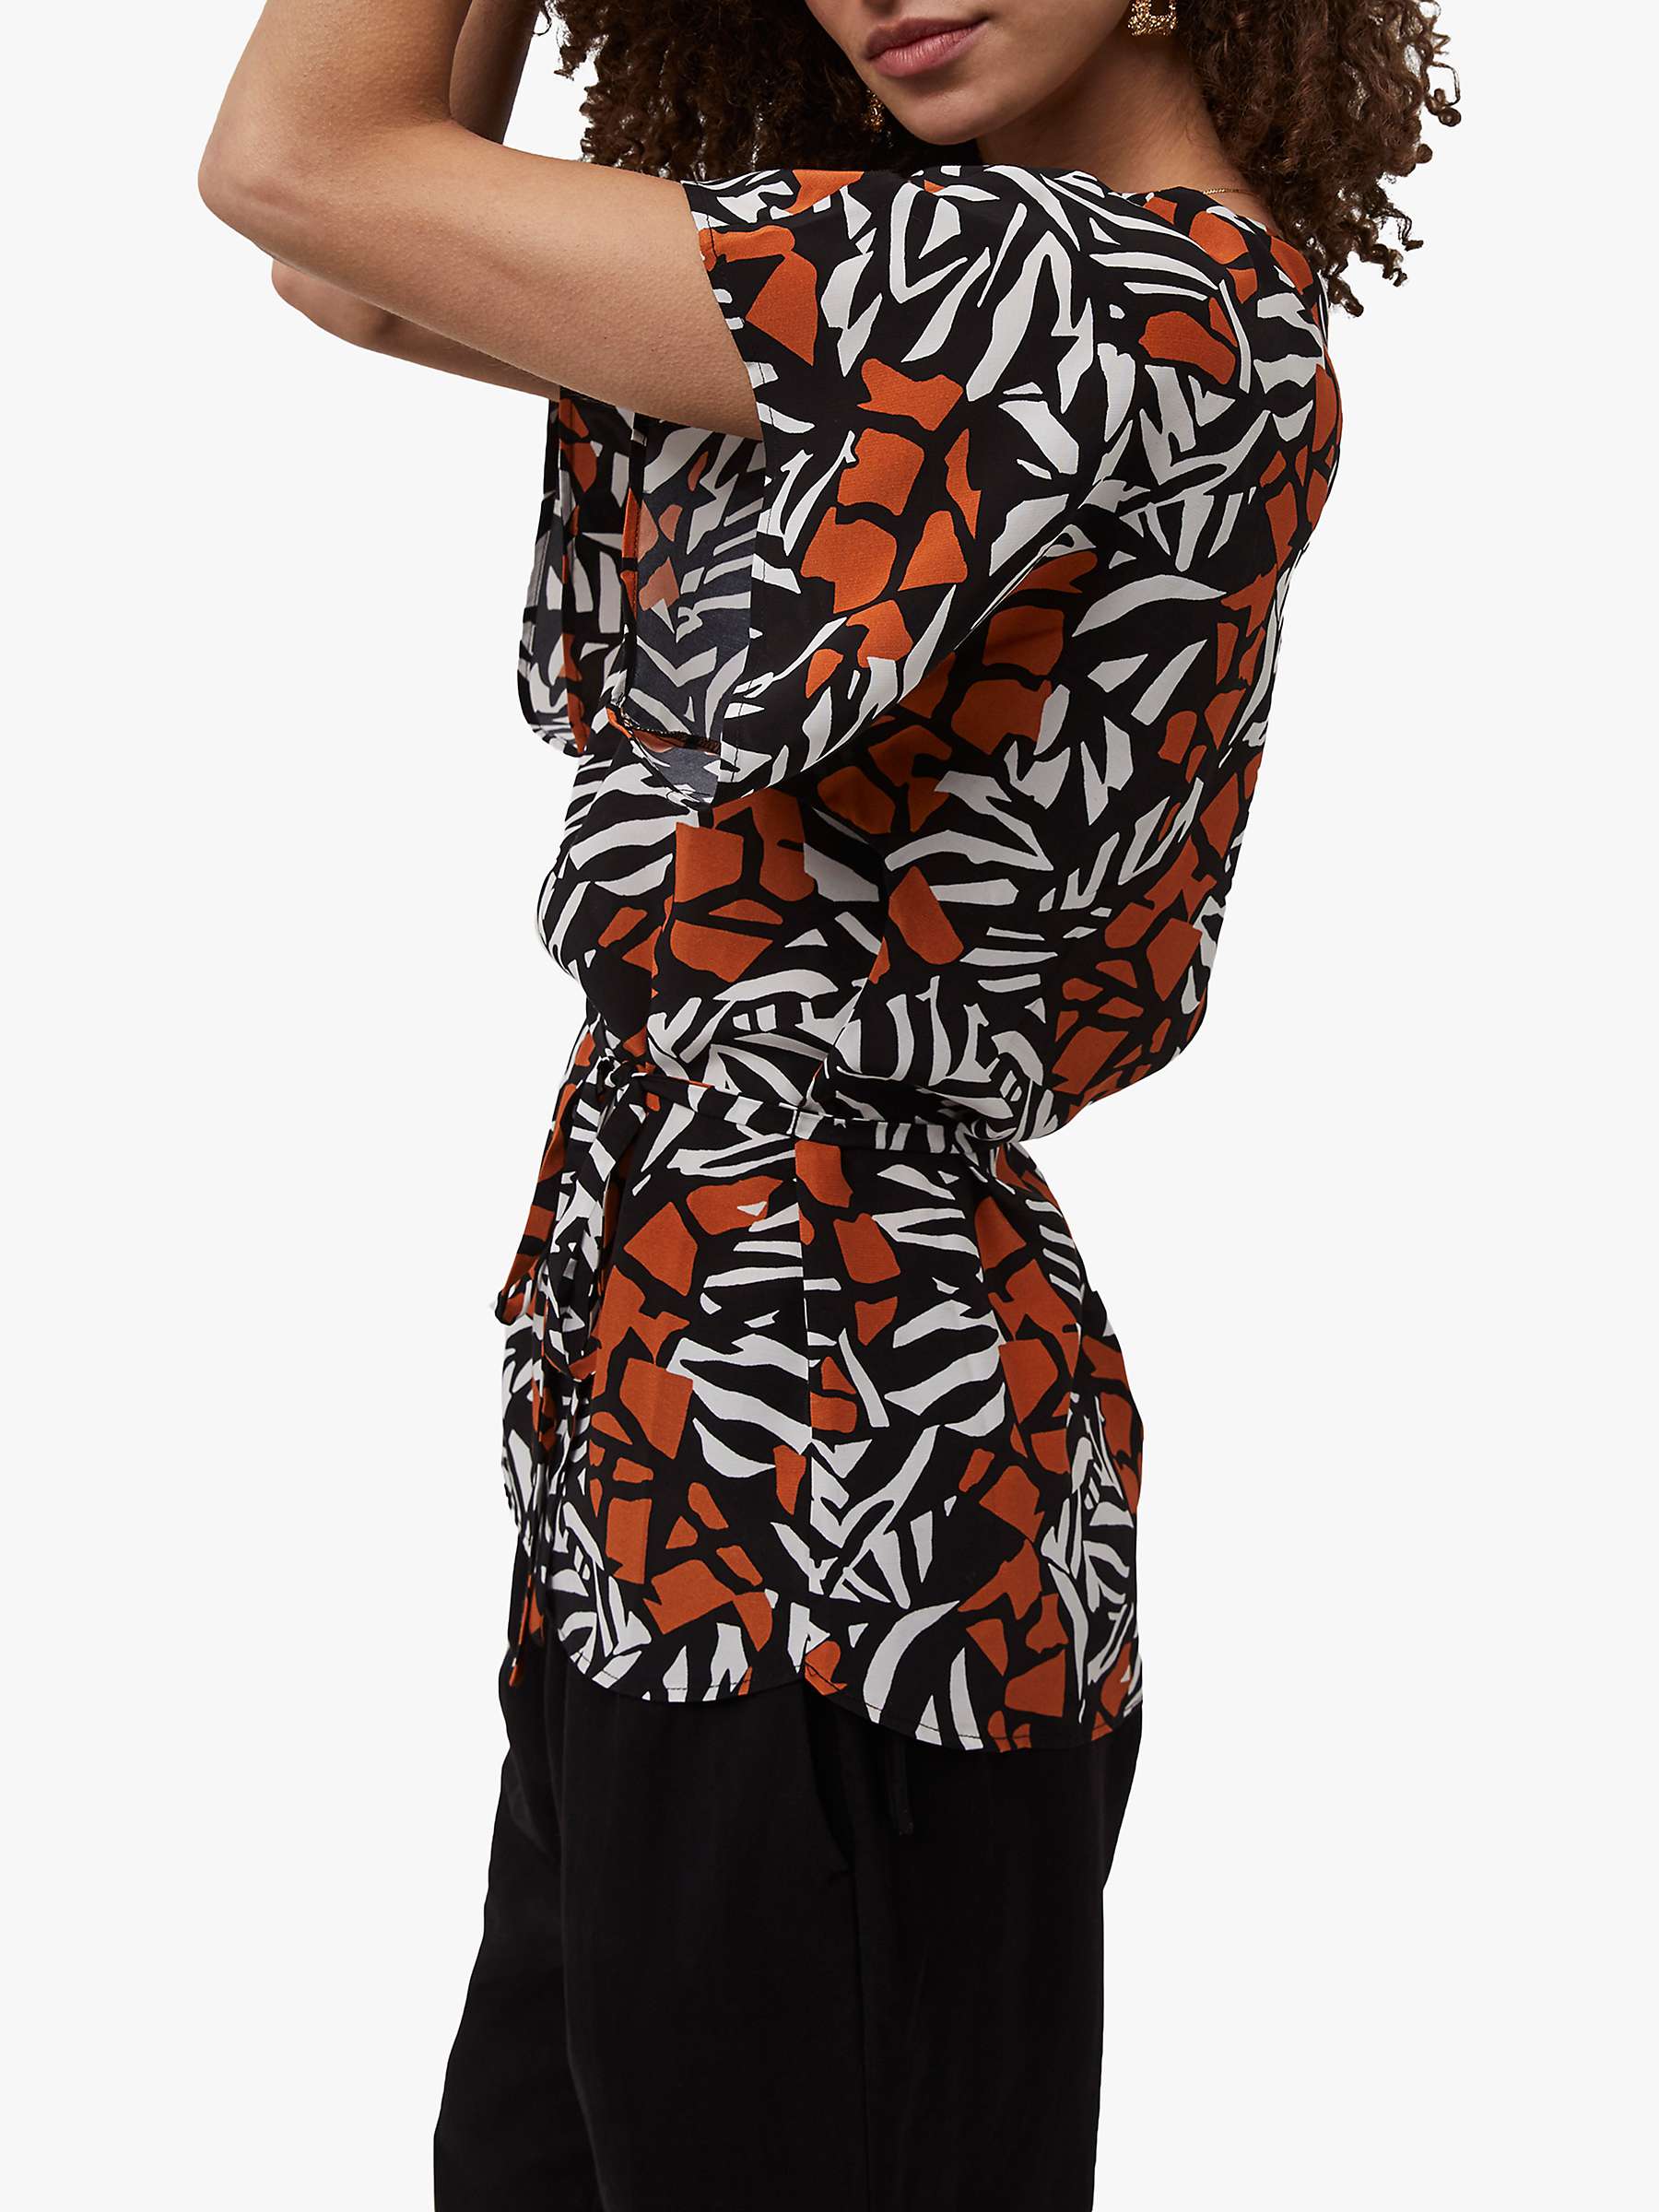 Buy French Connection Afara Abstract Print Top, Black/Multi Online at johnlewis.com